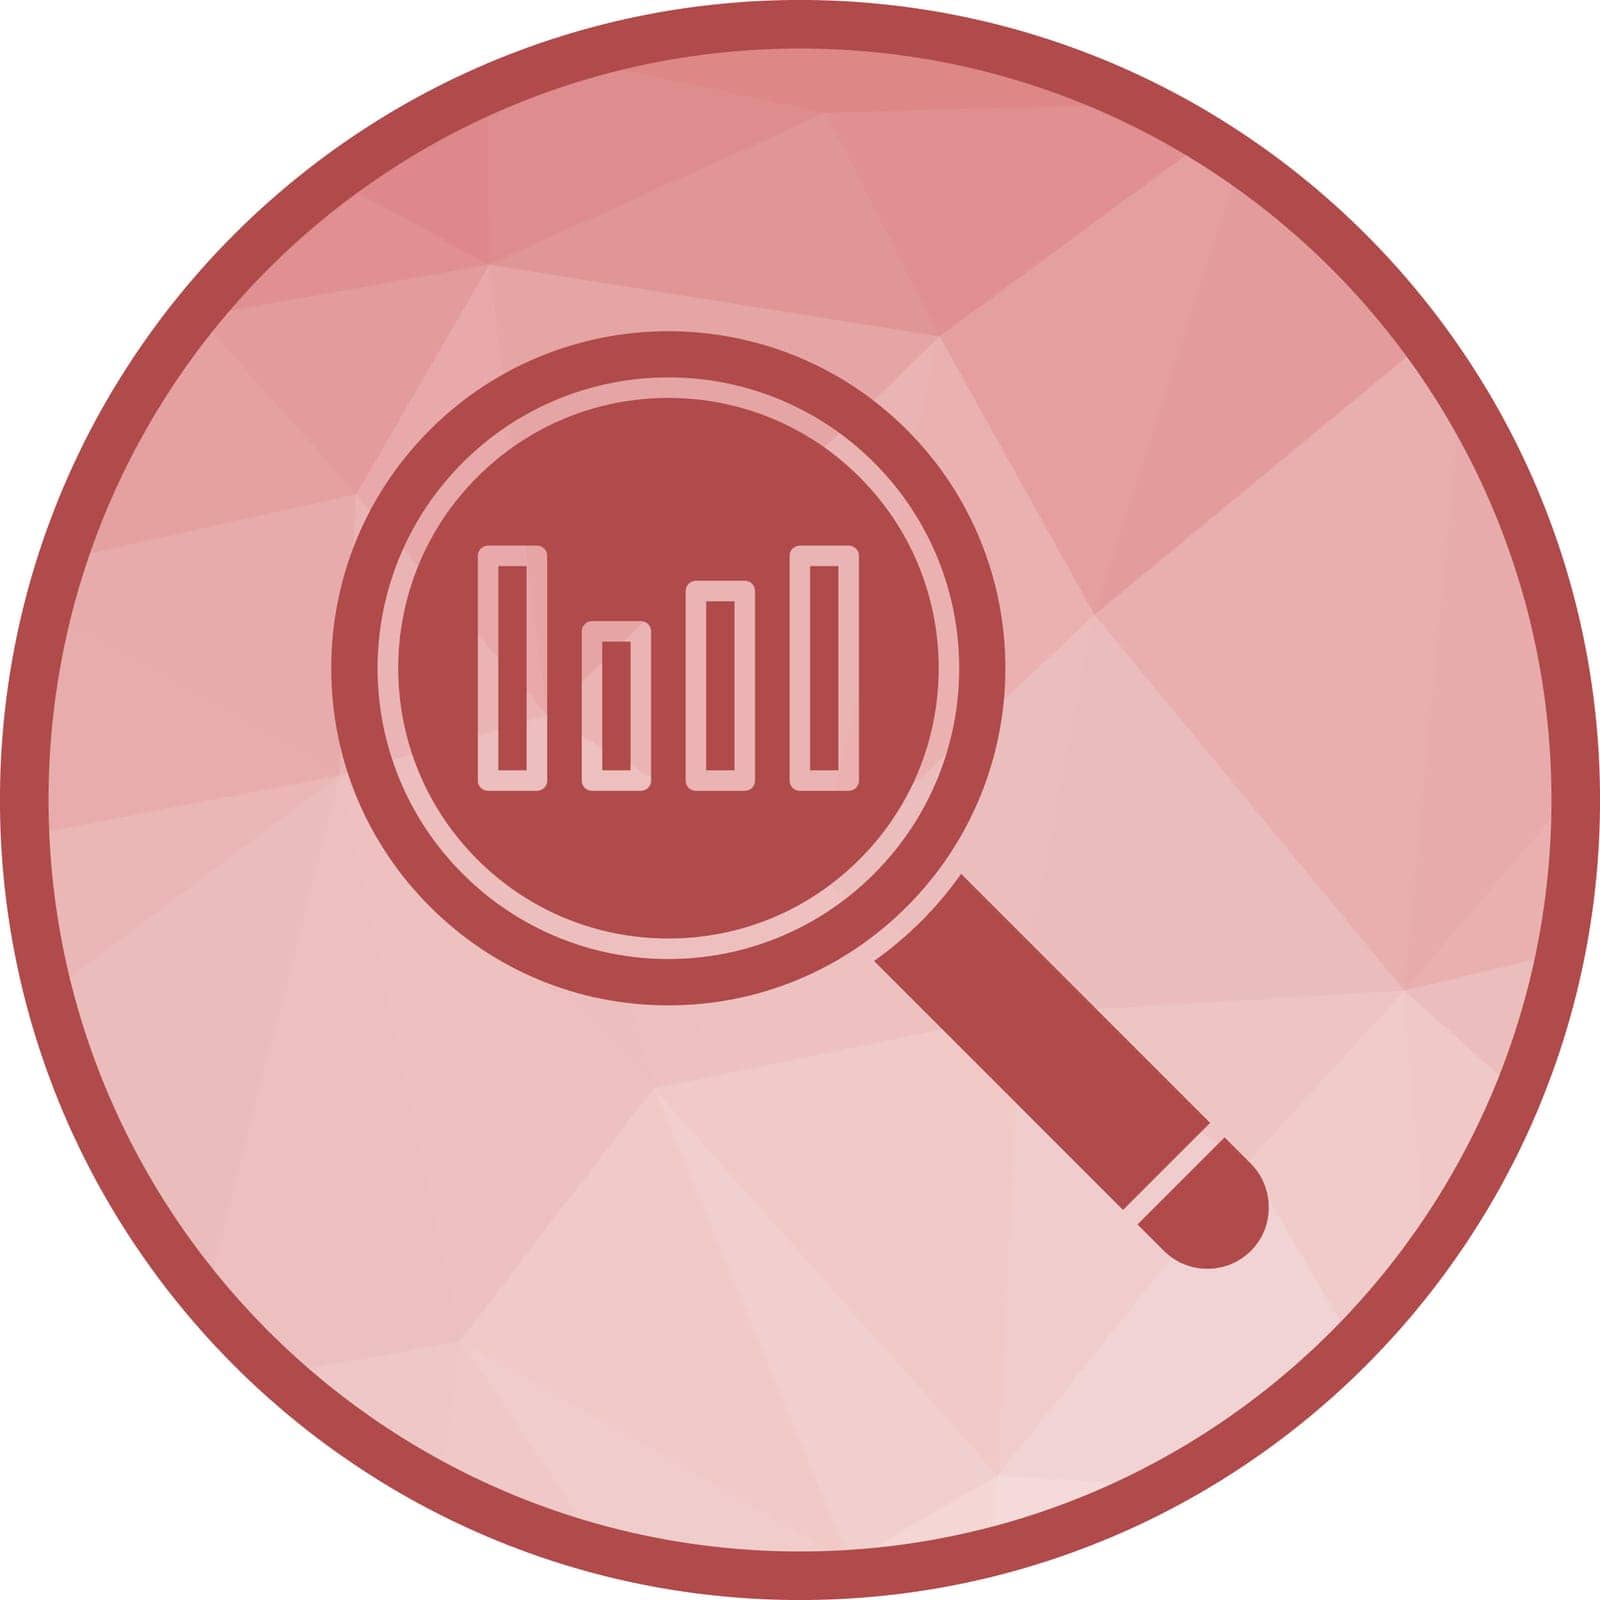 Search Analytics icon vector image. Suitable for mobile application web application and print media.